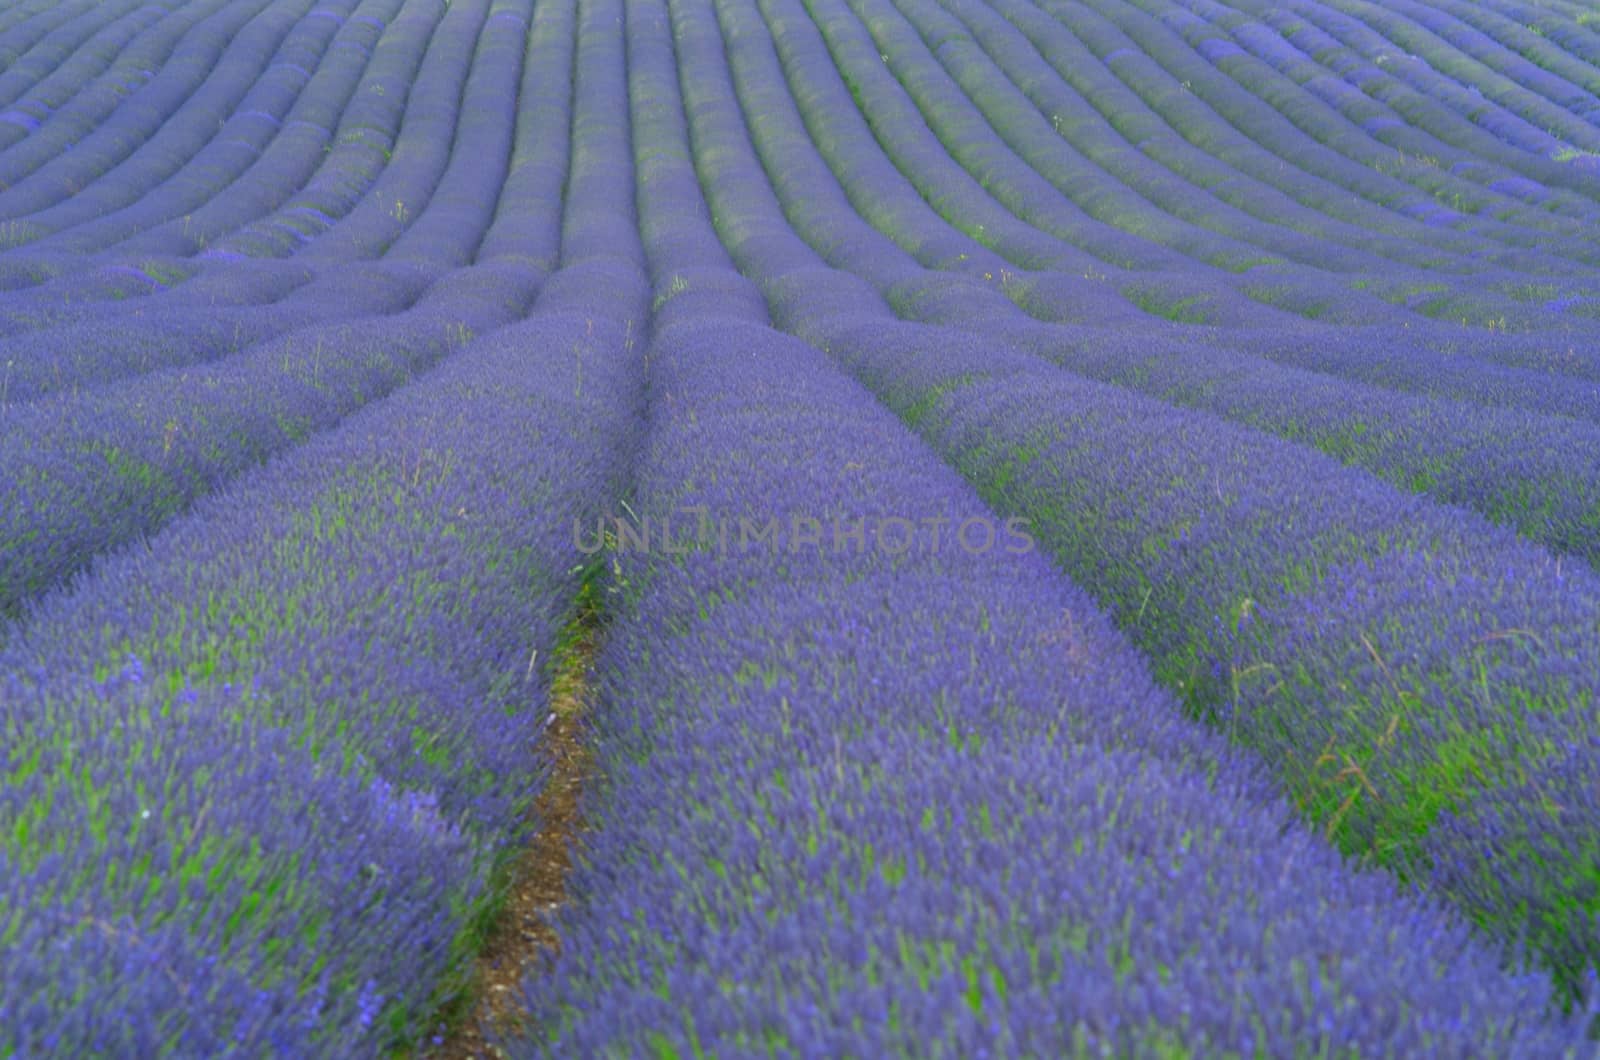 Long Rows of purple lavender by pauws99